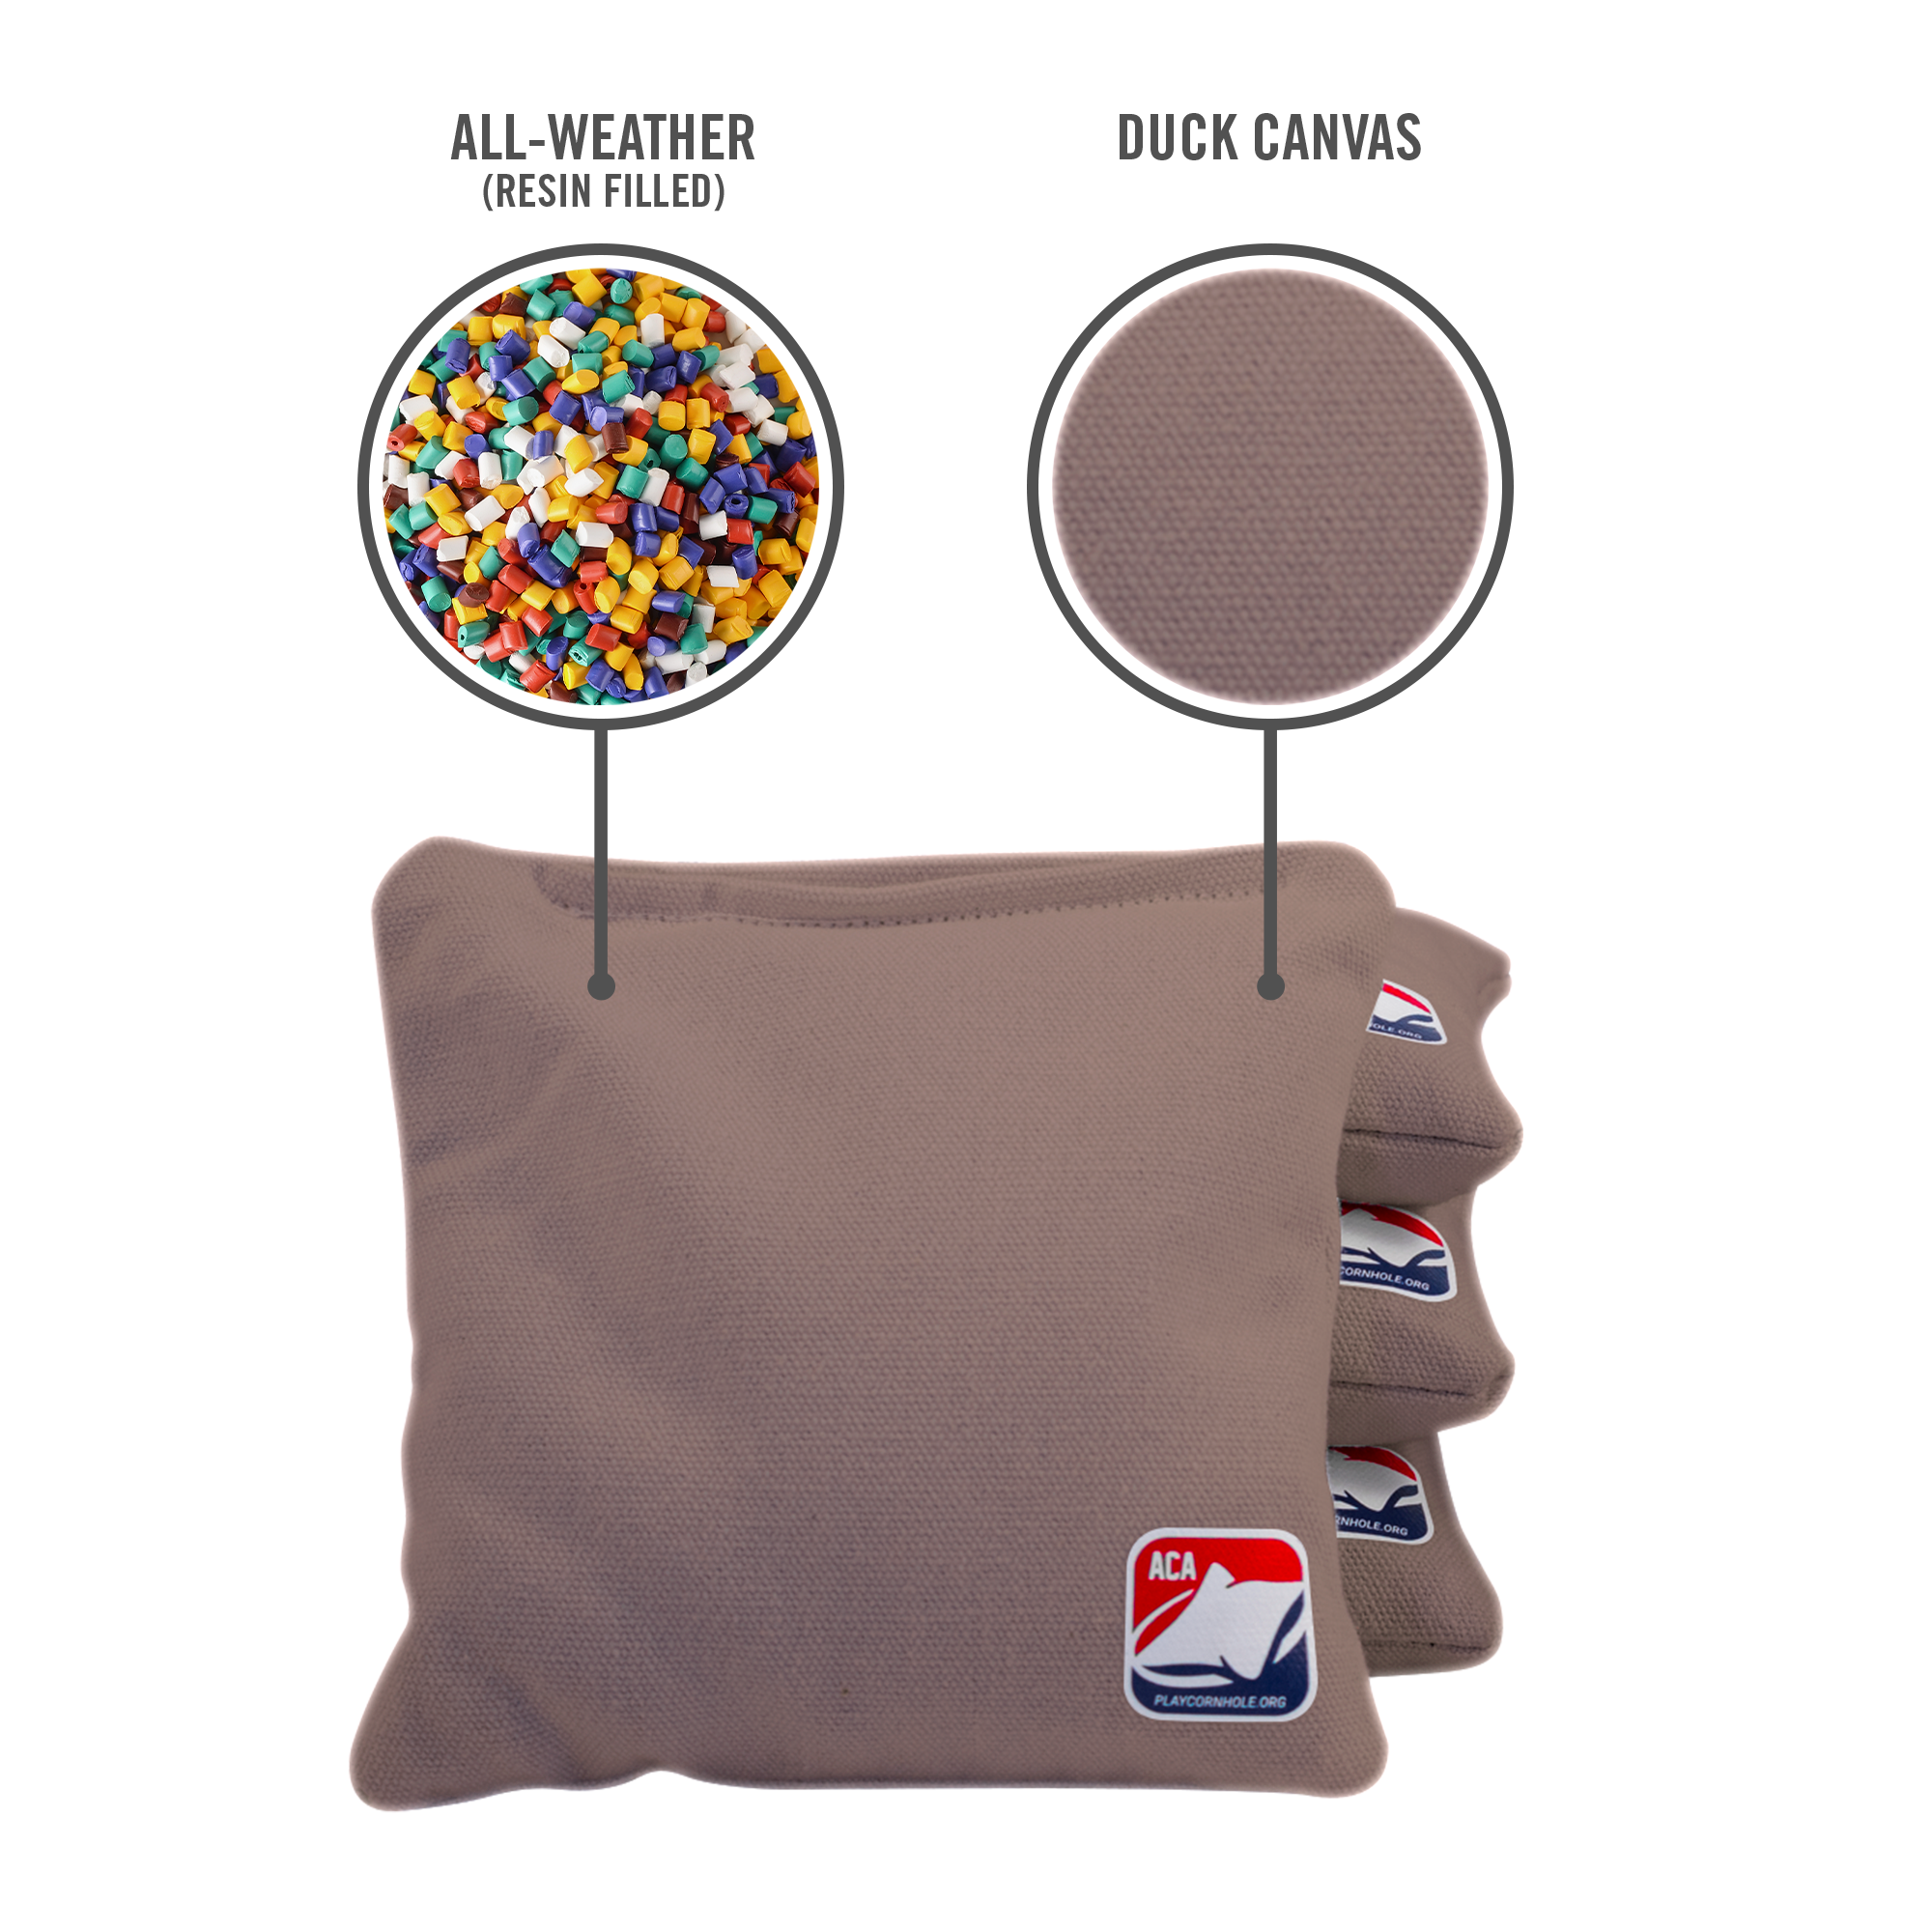 6-in Daily 66x Gray Competition Regulation Cornhole Bags